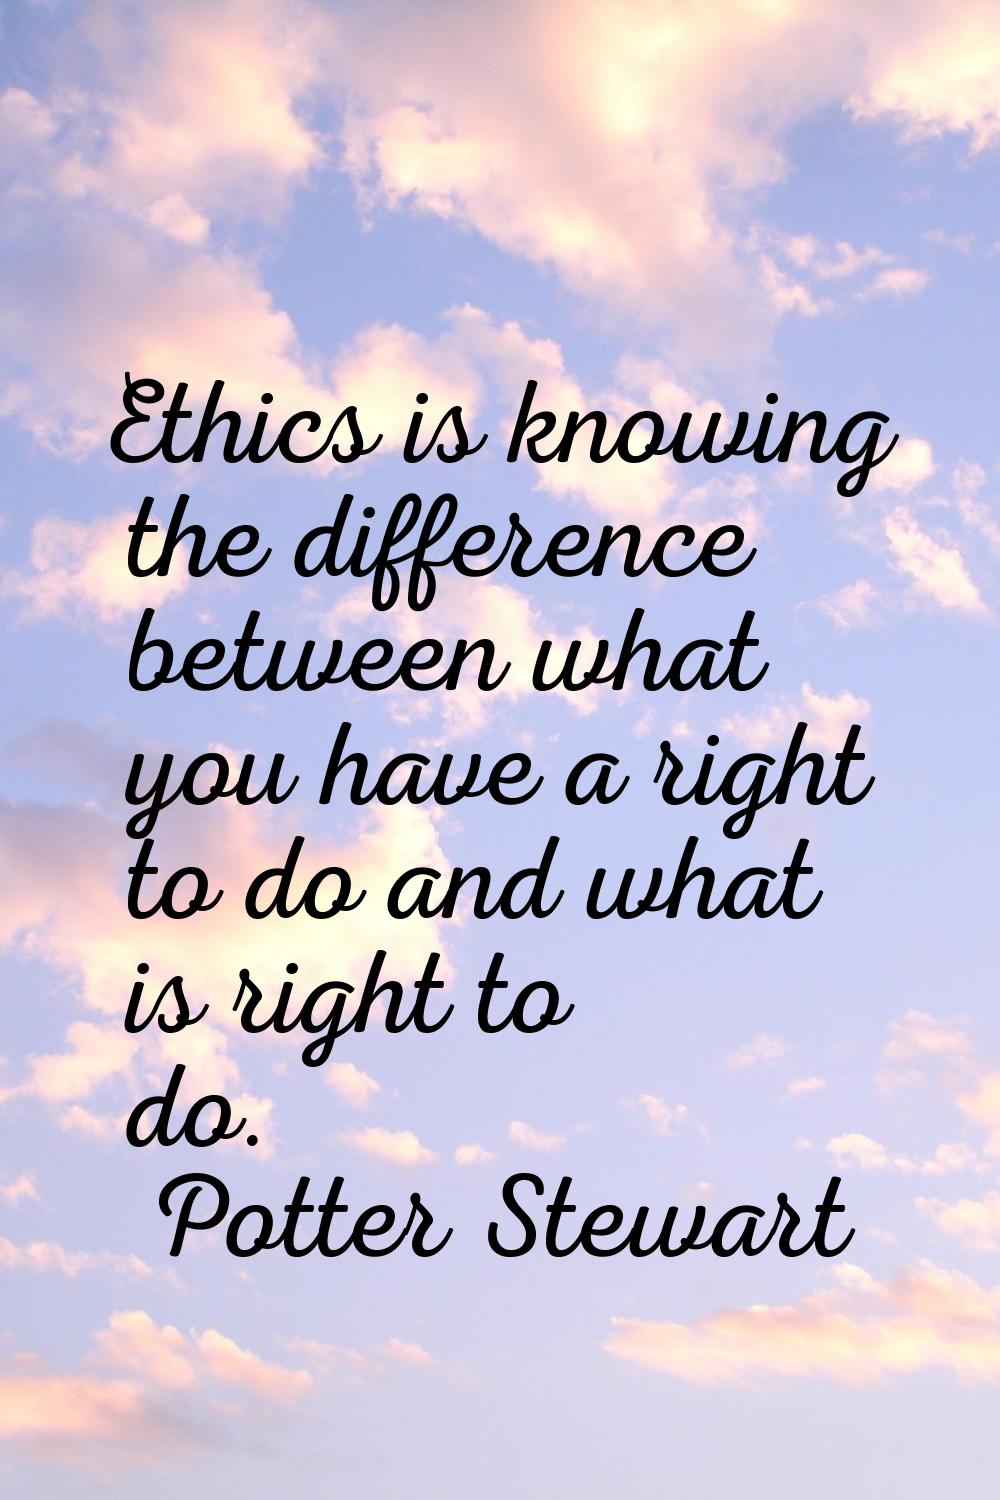 Ethics is knowing the difference between what you have a right to do and what is right to do.